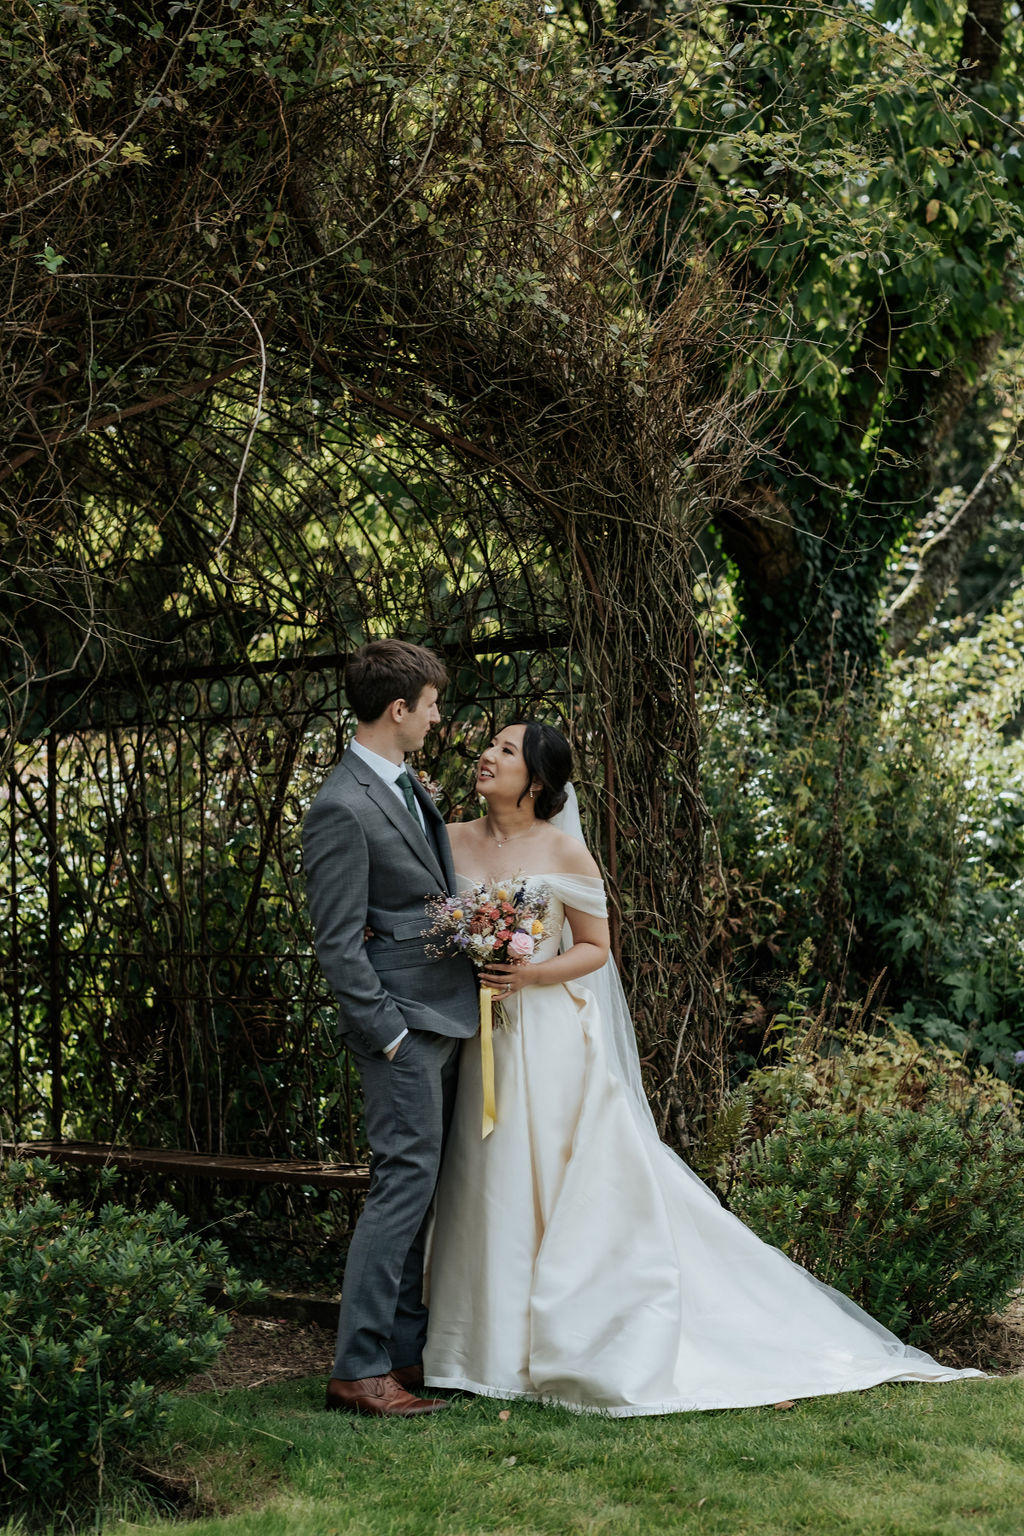 Multicultural Wedding With Ethical Details At Miskin Manor Wales